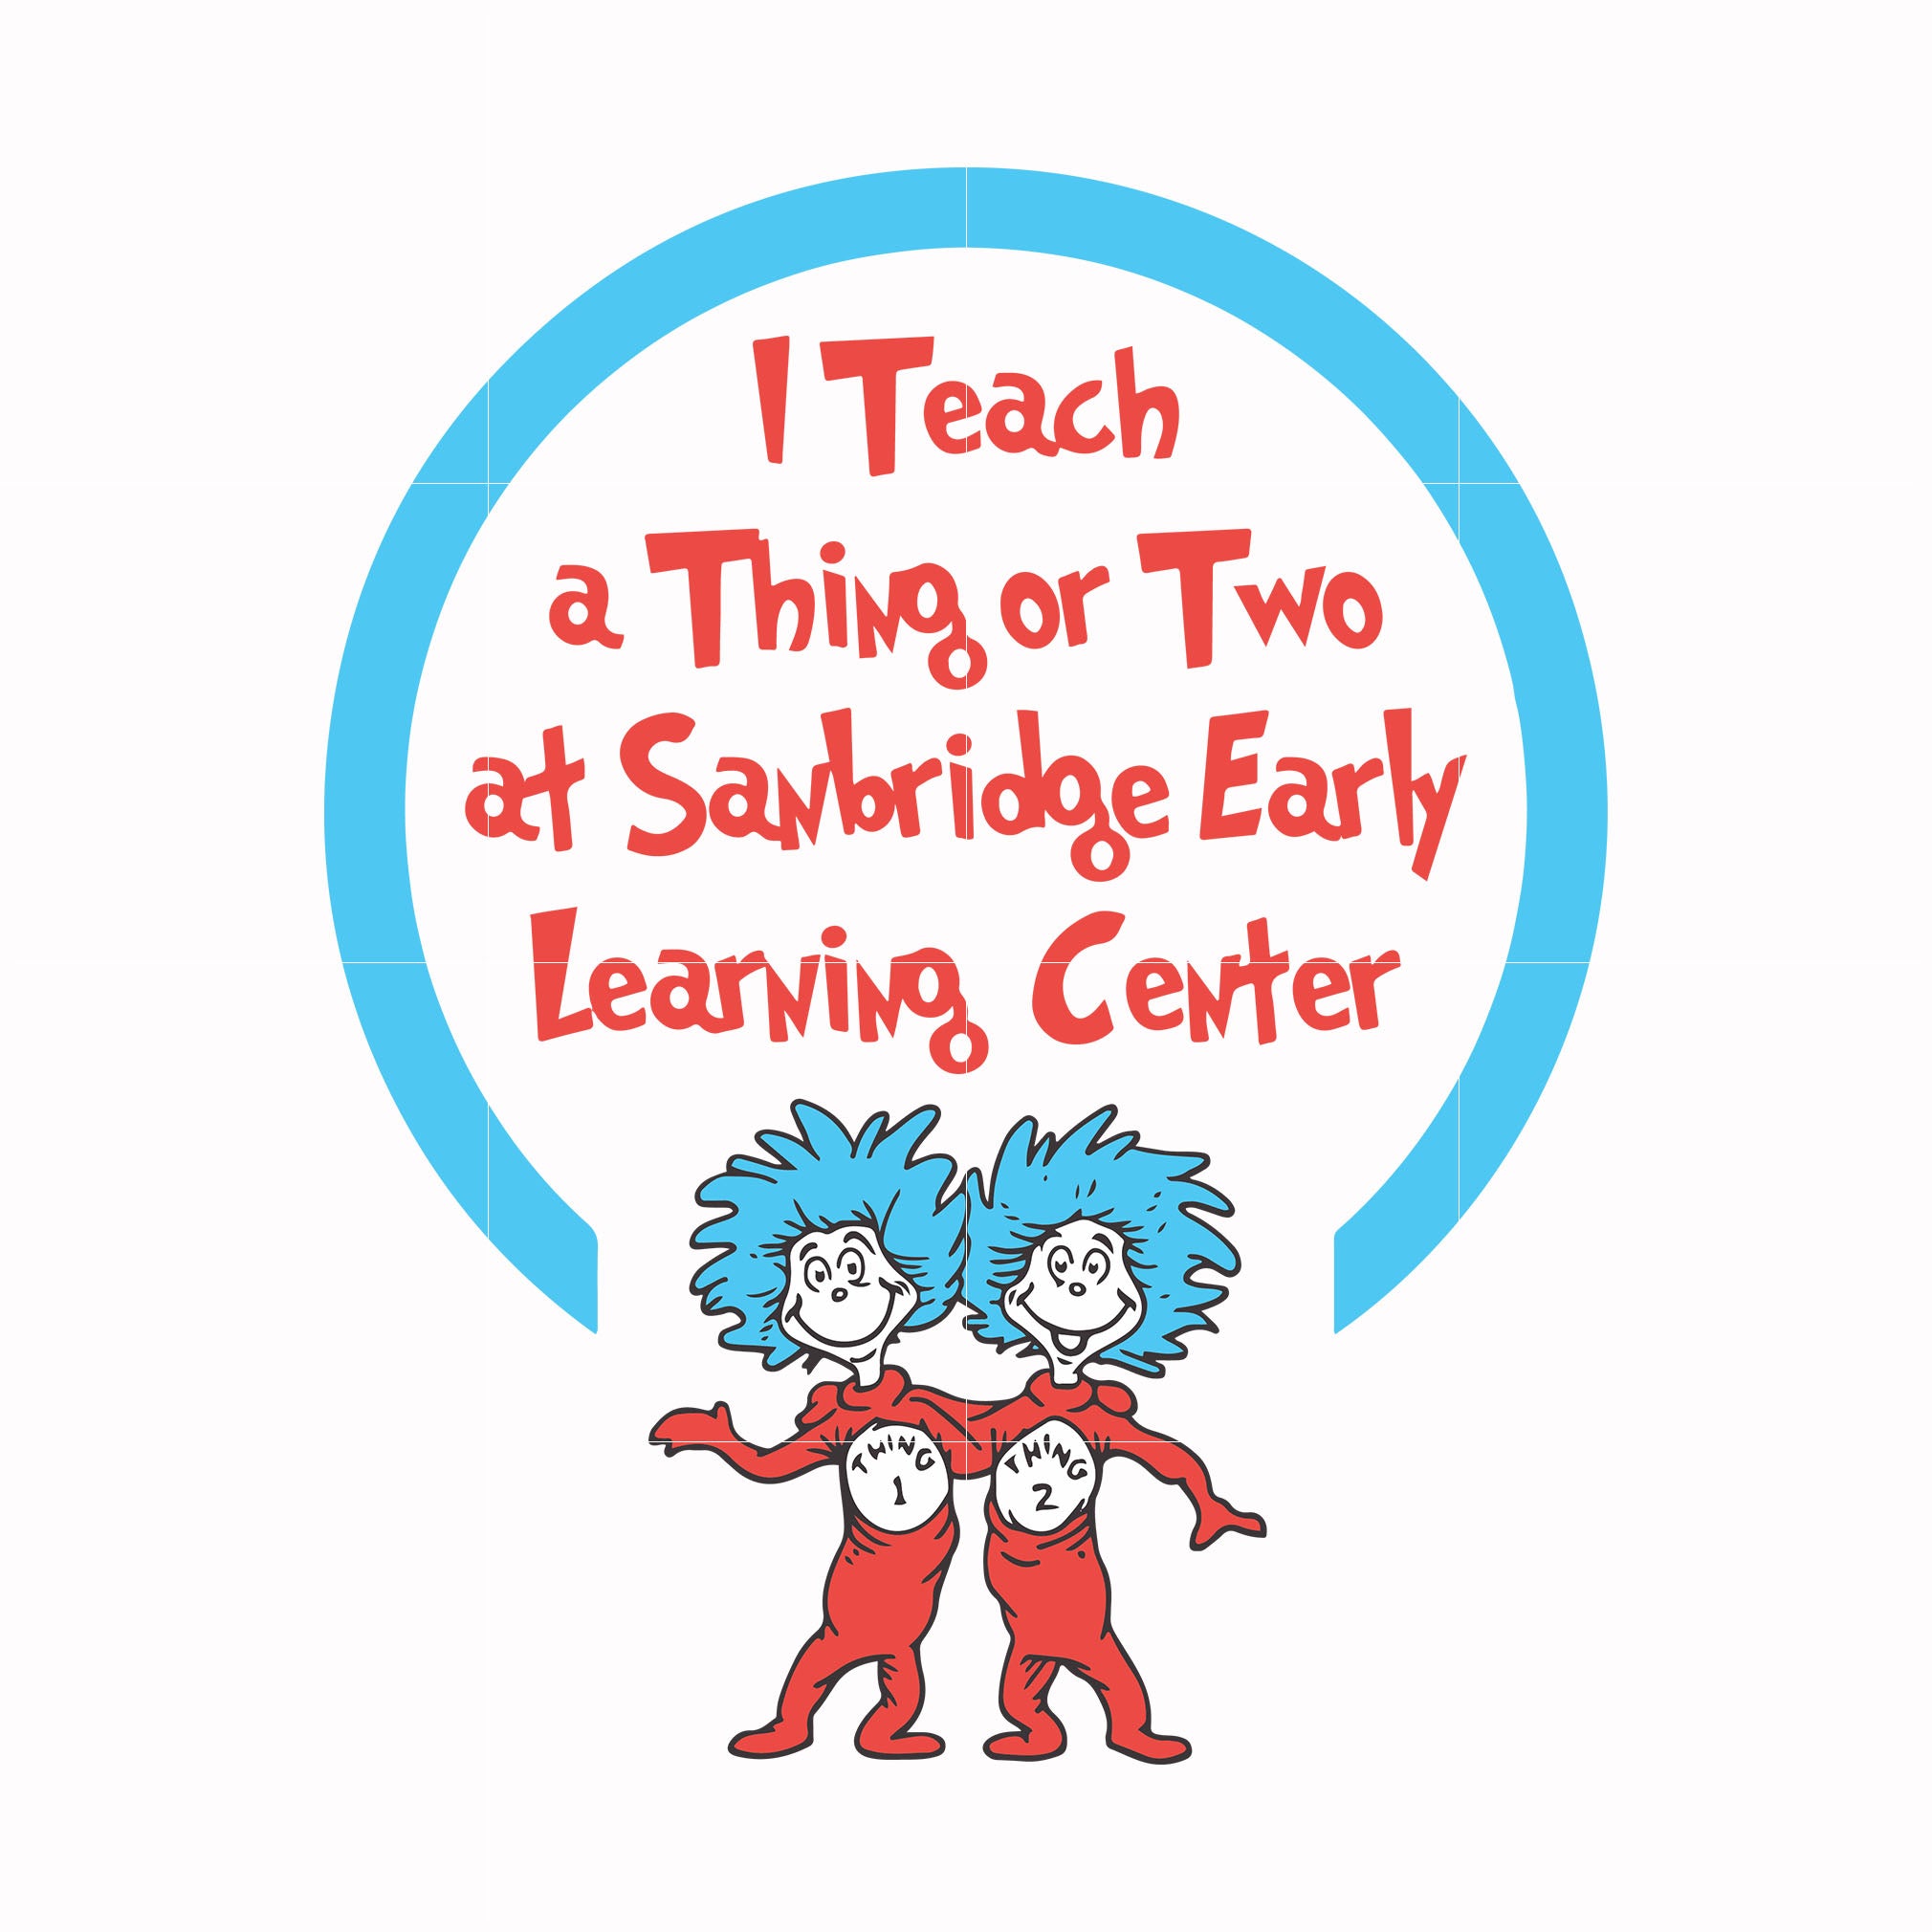 I teach a thing or two at Sanbridge early learning center svg, png, dxf, eps file